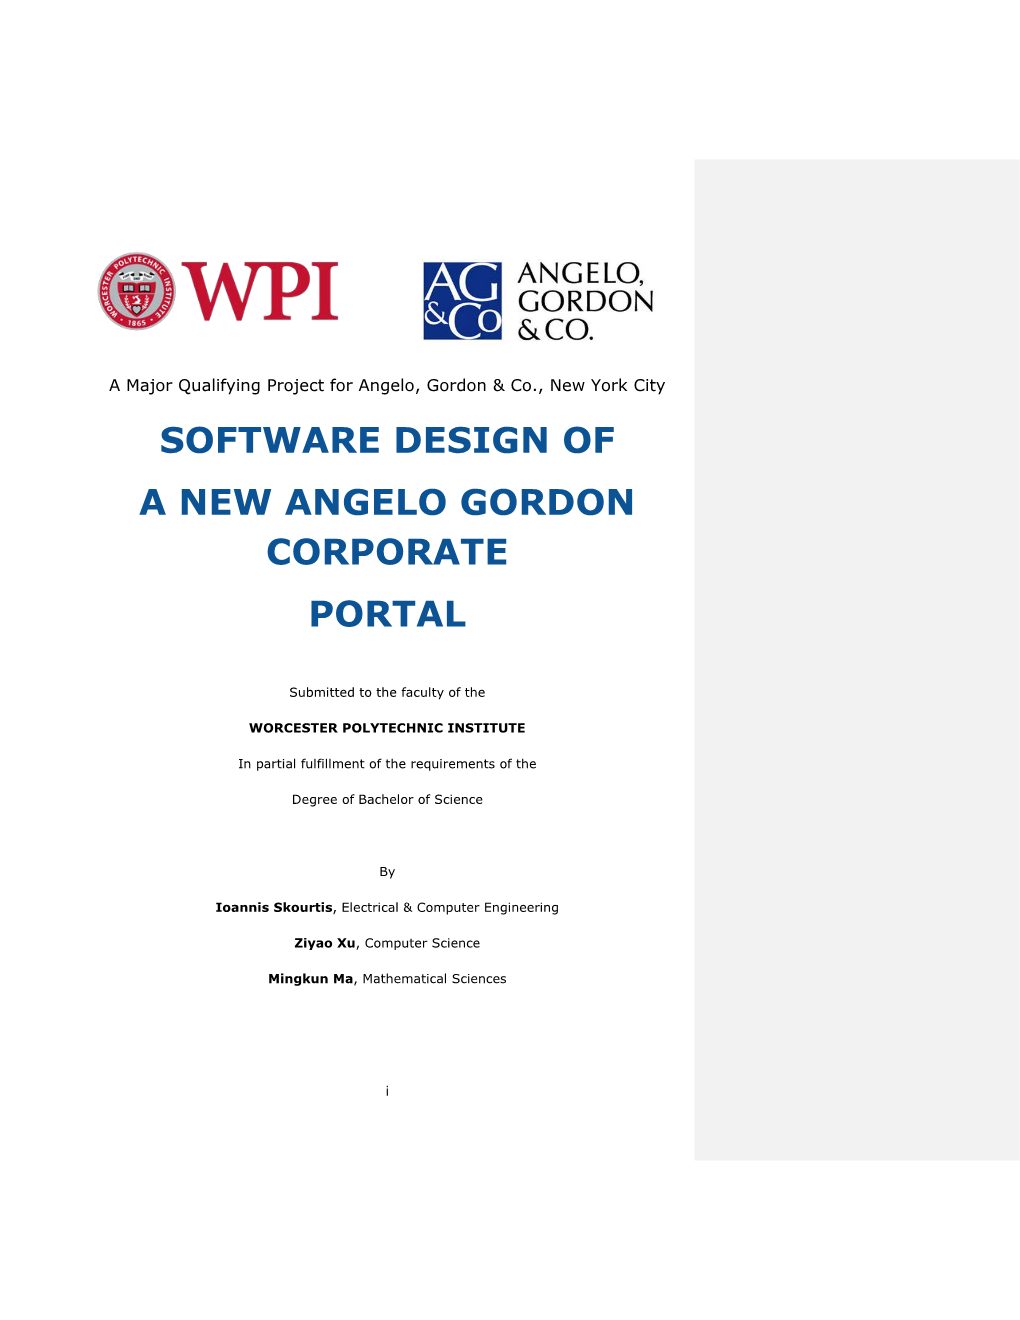 Software Design of a New Angelo Gordon Corporate